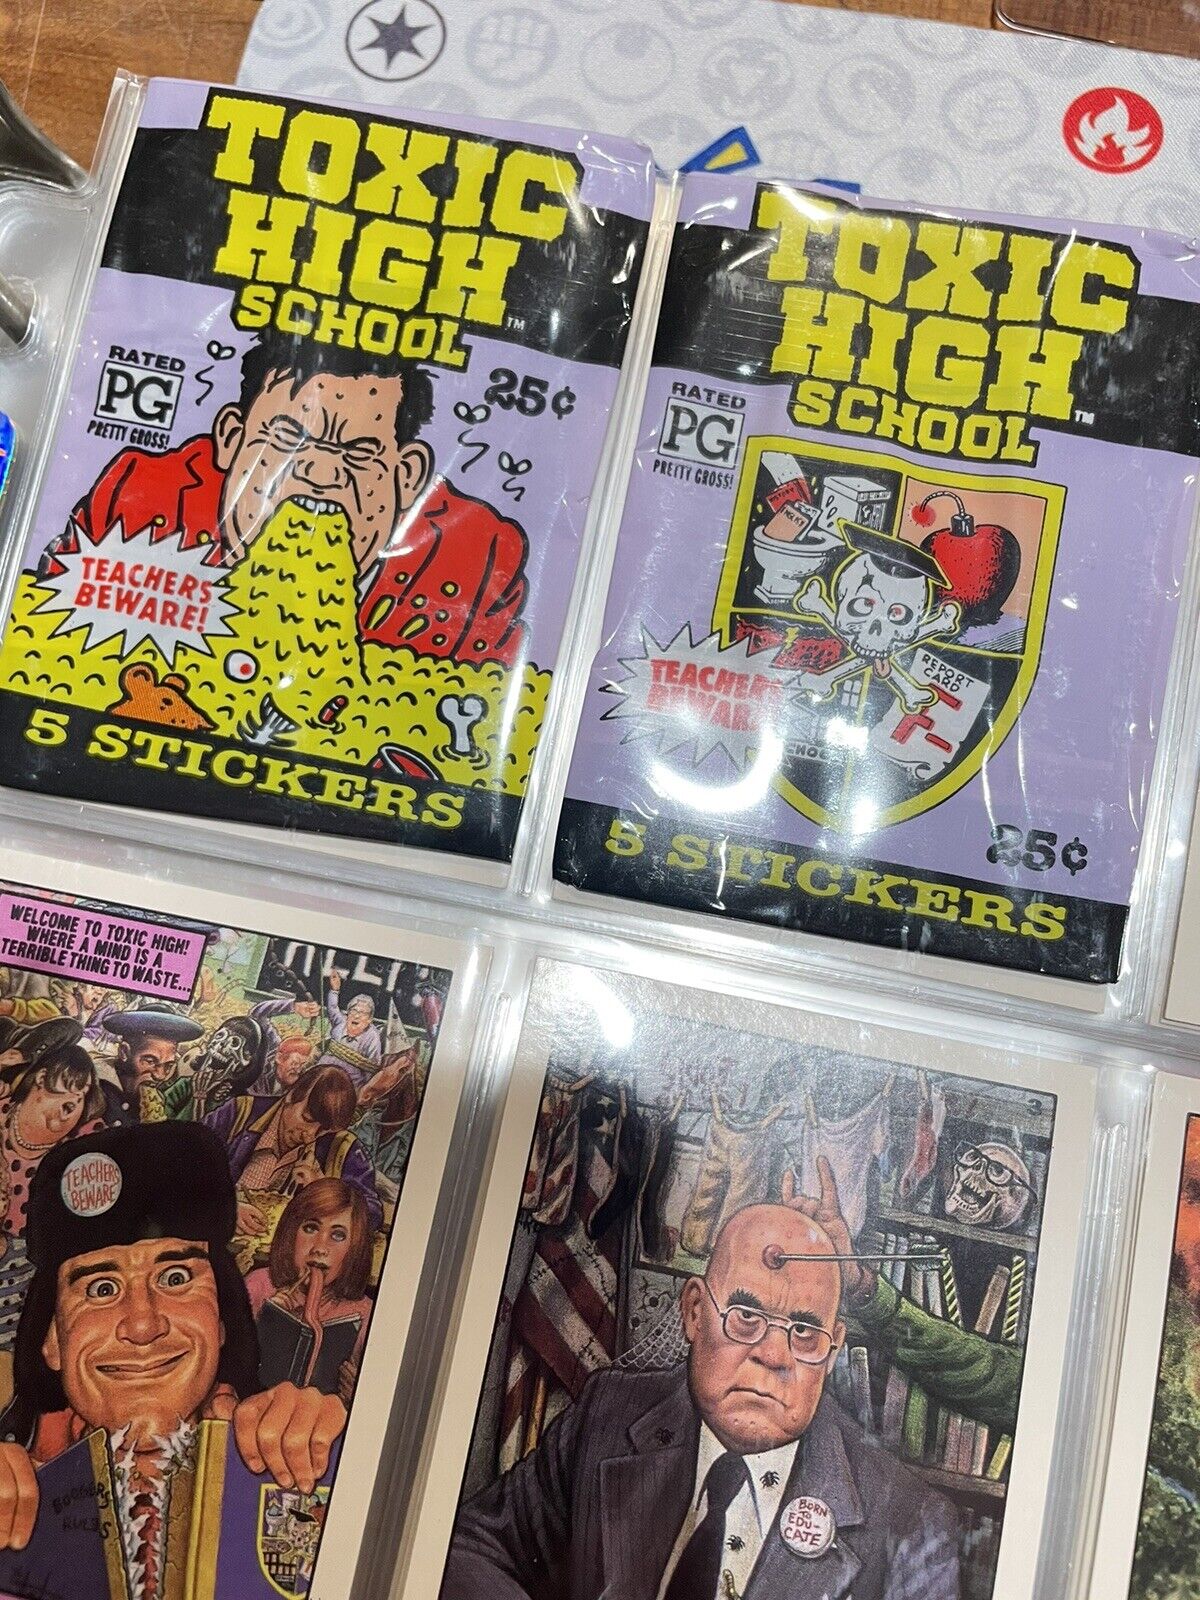 Lot of 4 TOXIC HIGH SCHOOL Trading Cards COMPLETE SET of 88 Cards VTG Topps 1991